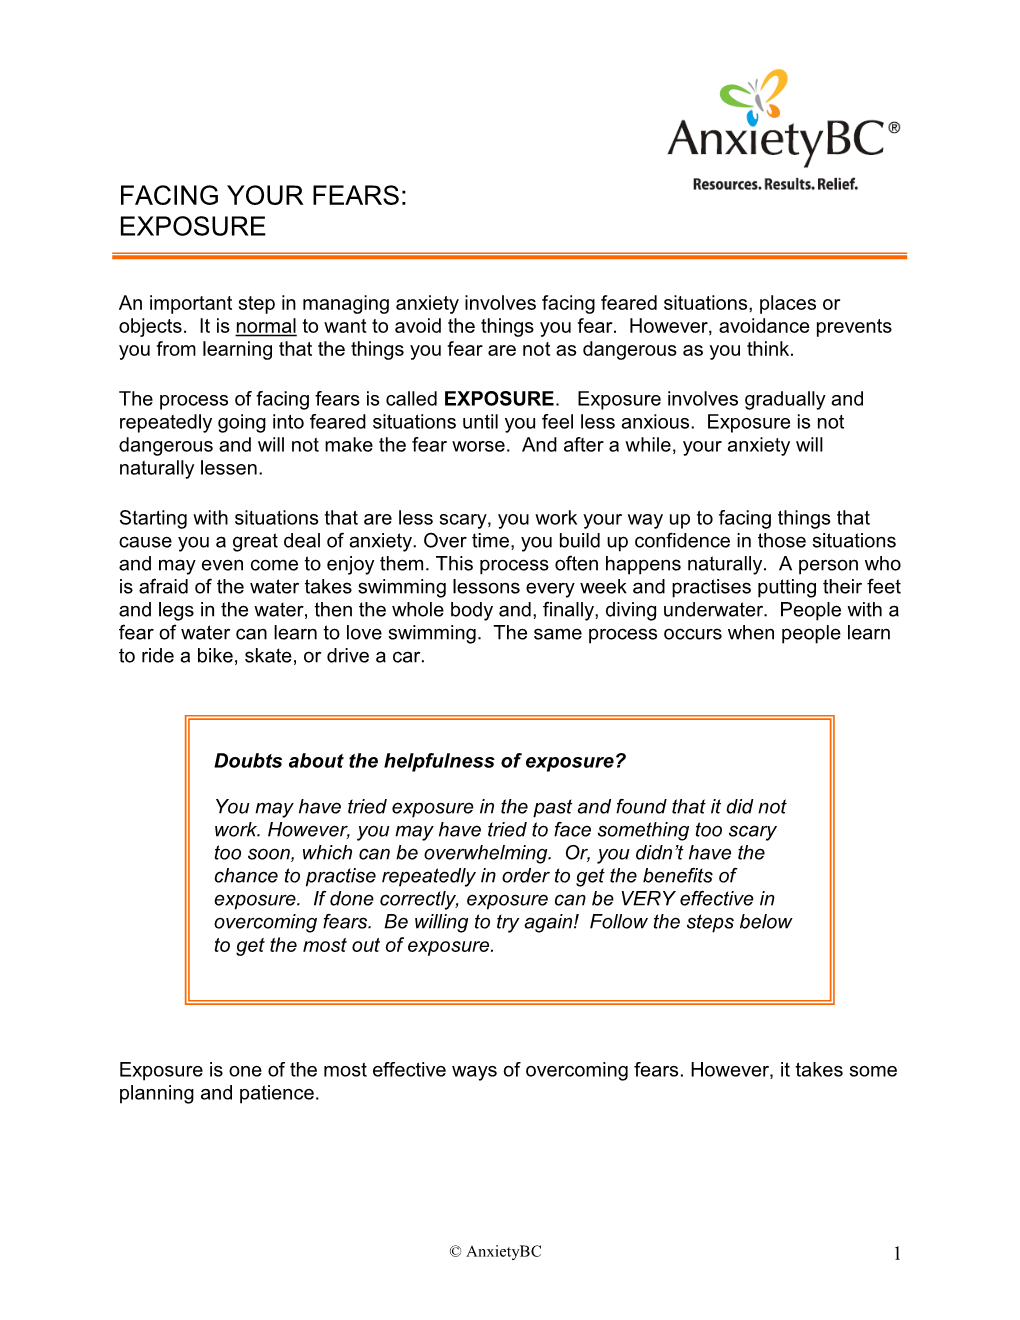 Facing Your Fears: Exposure